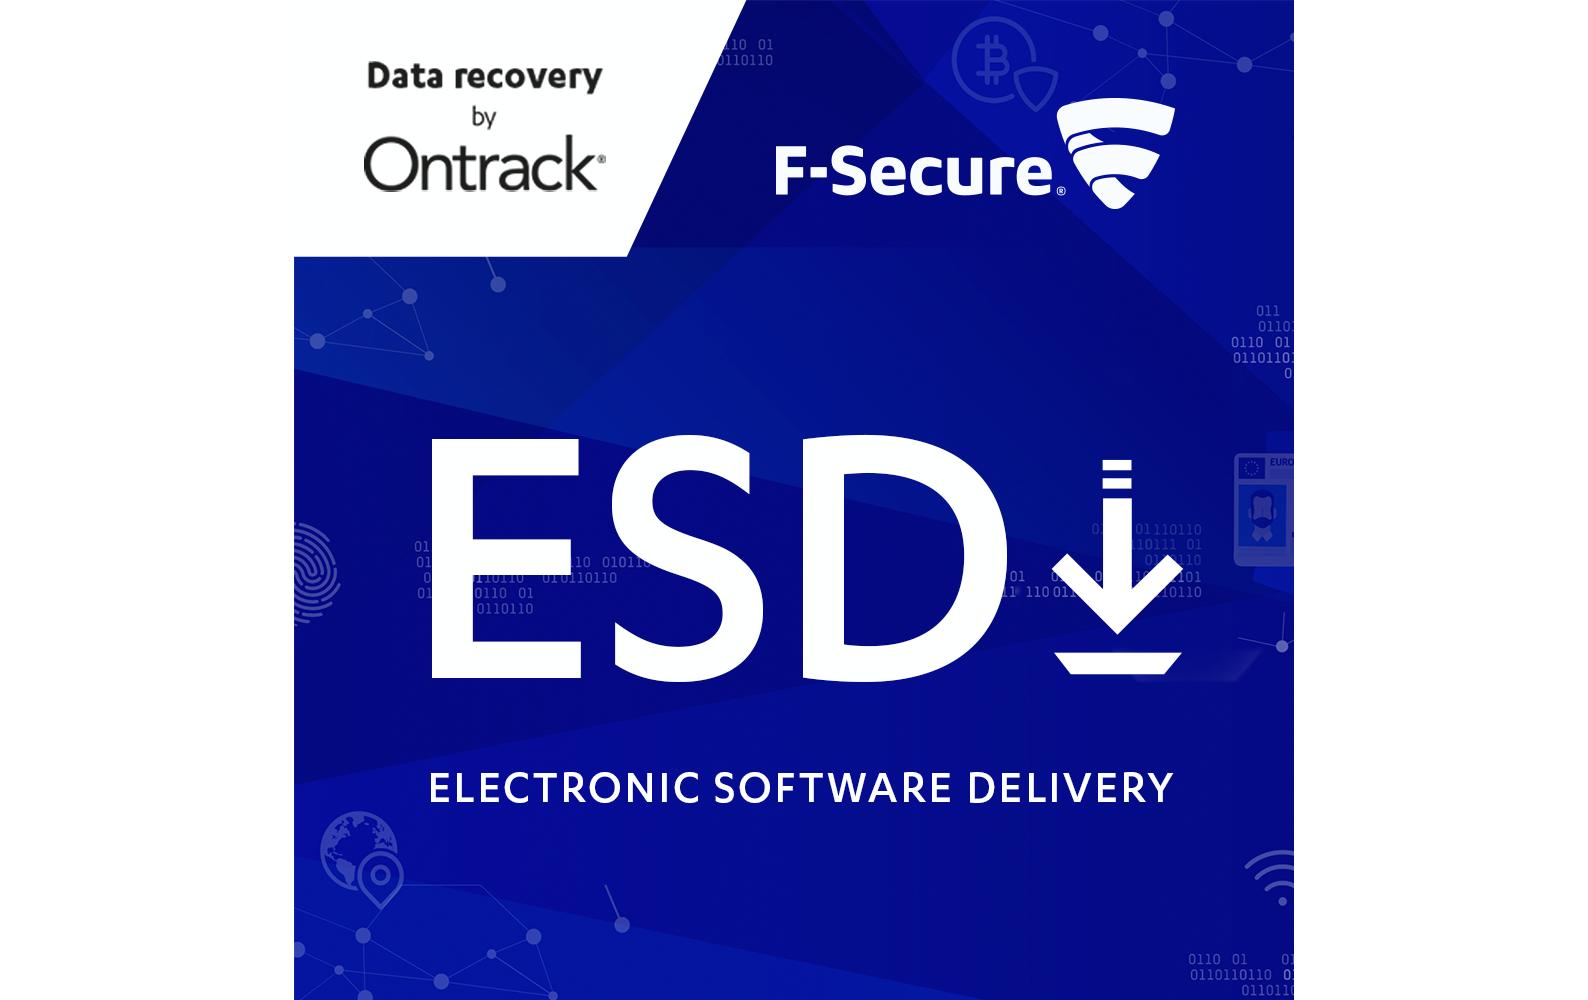 F-Secure SAFE + Ontrack Data Recovery Vollversion, 3 User, 1 Jahr